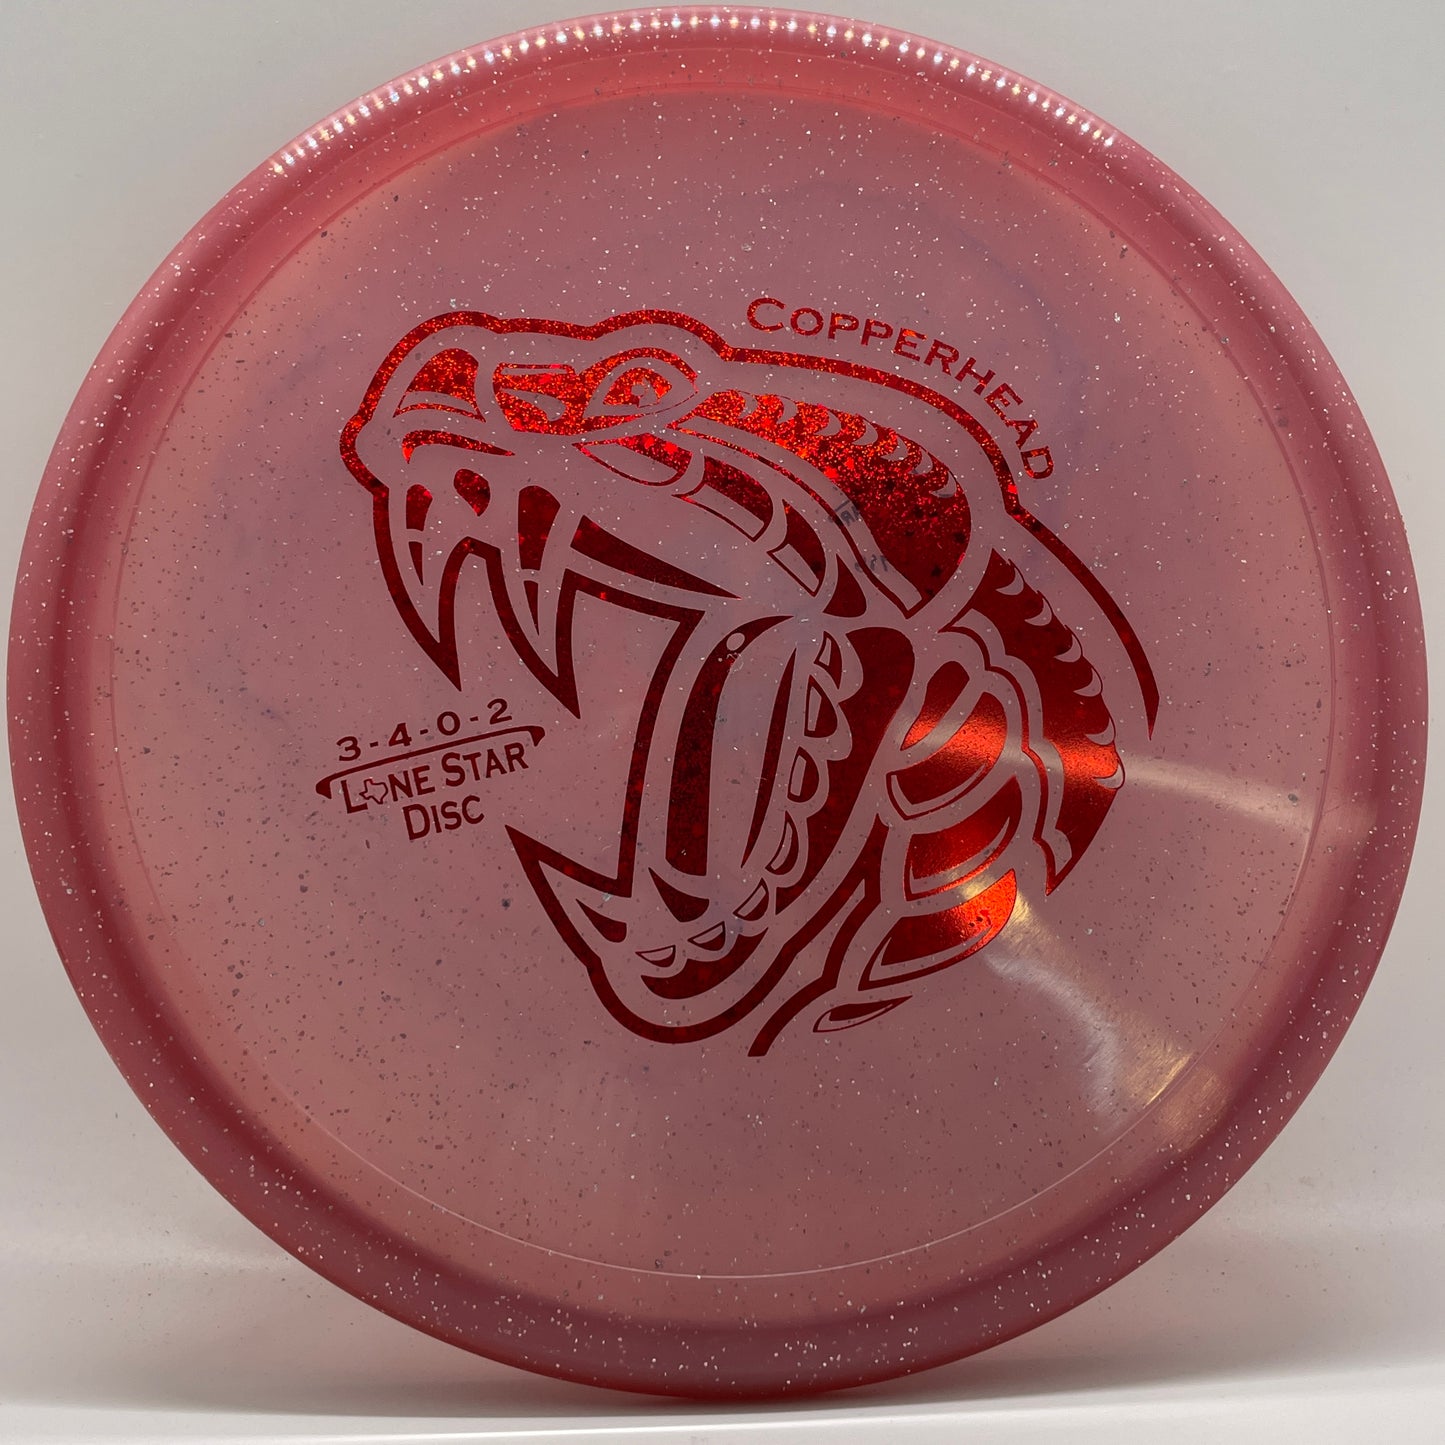 Lone Star Disc Founders Copperhead - Putt/Approach